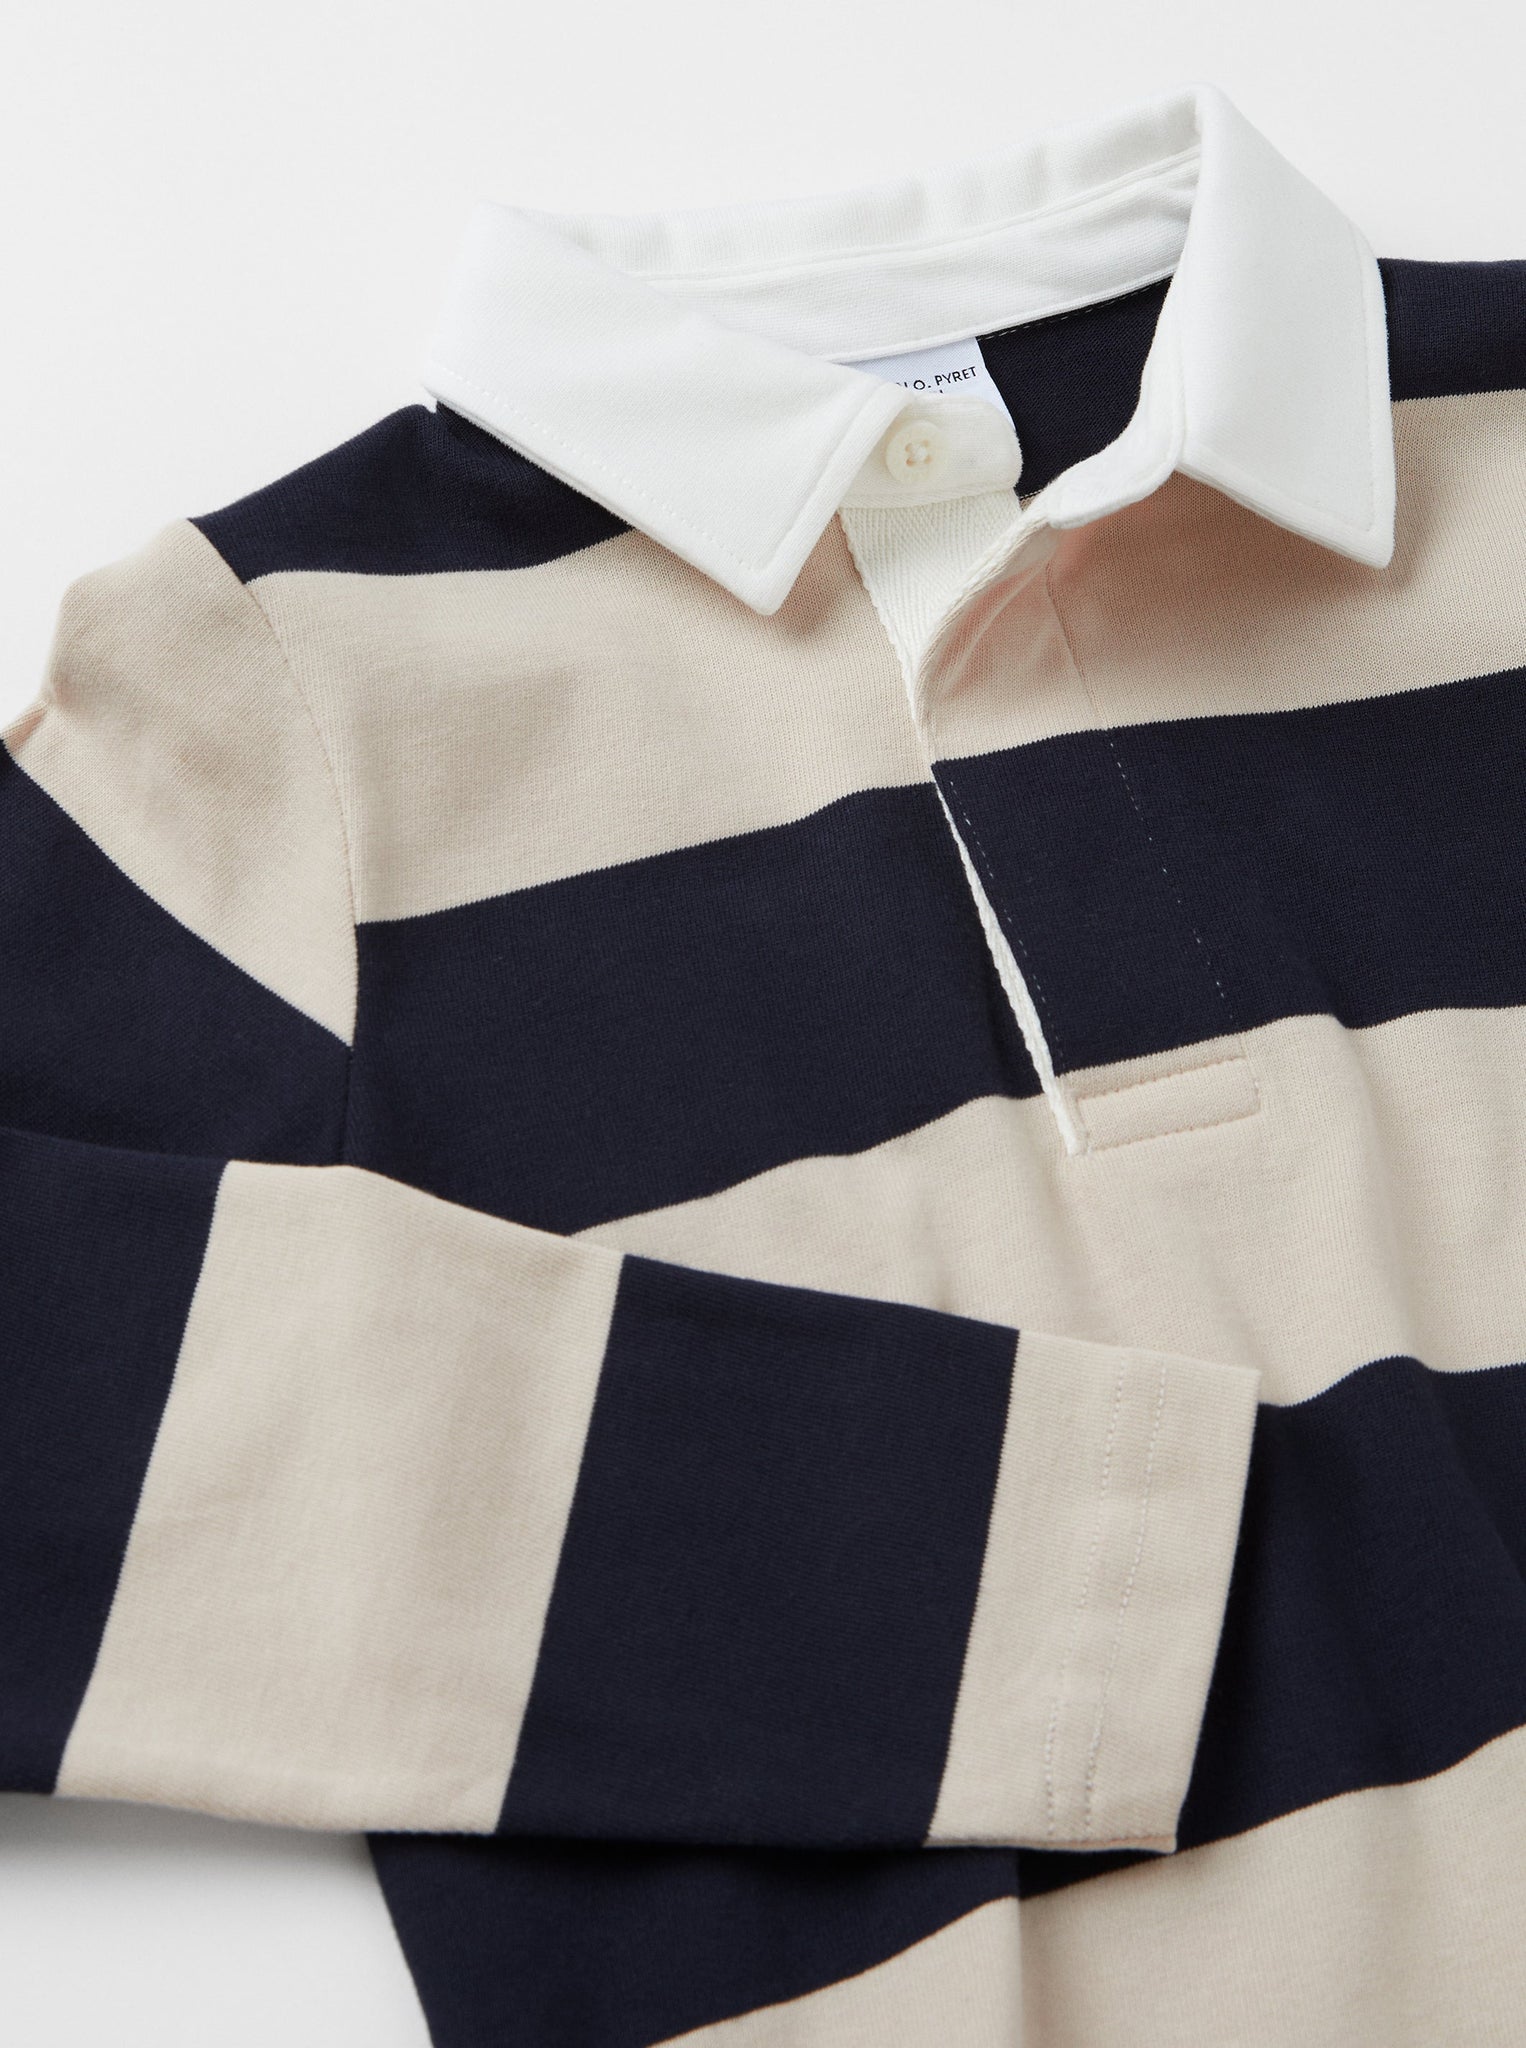 Striped Beige Kids Rugby Top from the Polarn O. Pyret kidswear collection. Clothes made using sustainably sourced materials.